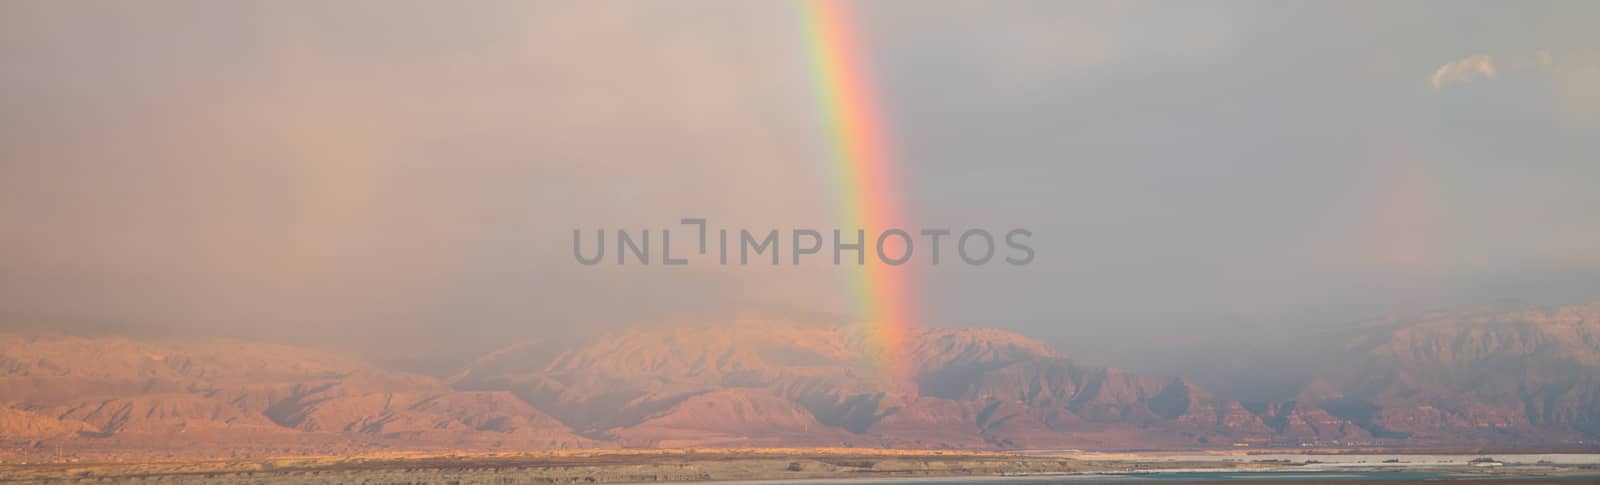 rainbow over the desert by compuinfoto